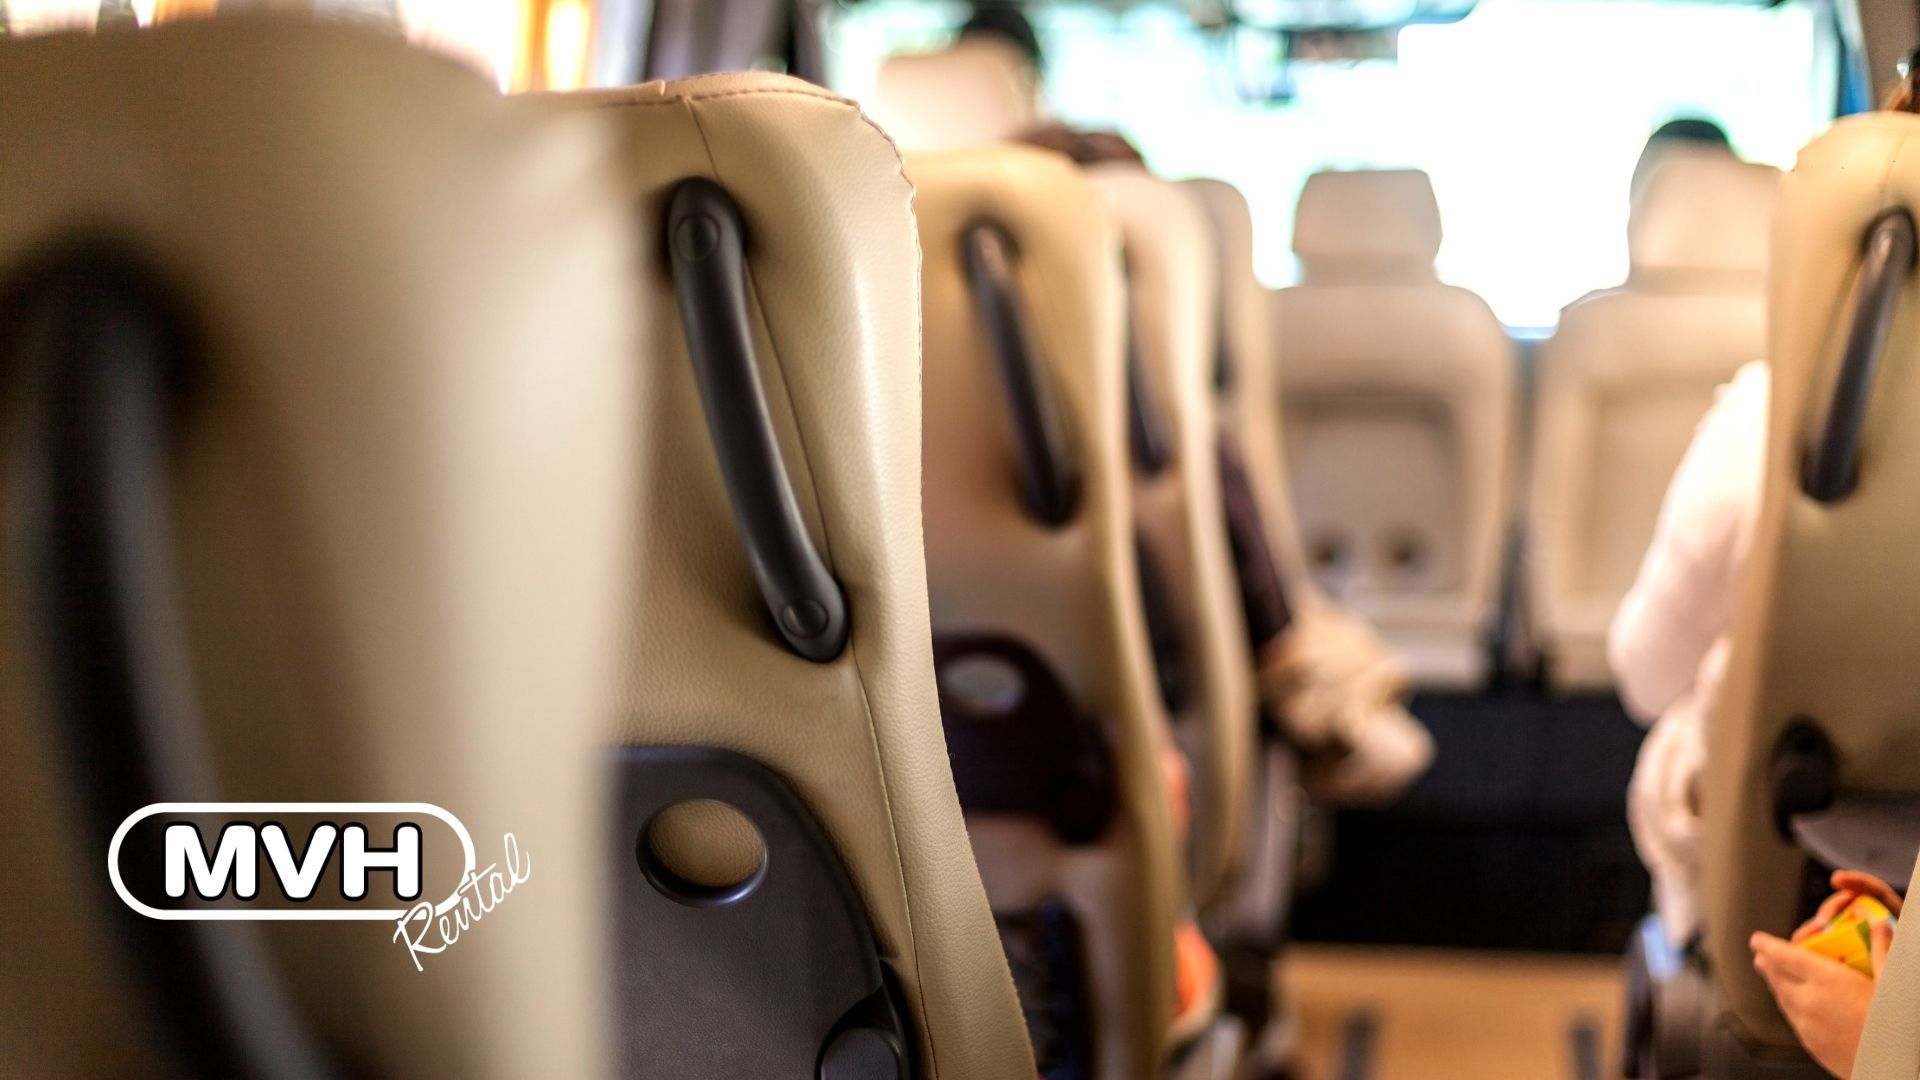 It's longer and heavier than a car – and you've got passengers! But follow our minibus safety tips and you'll be ready for an (almost) stress-free school trip.
